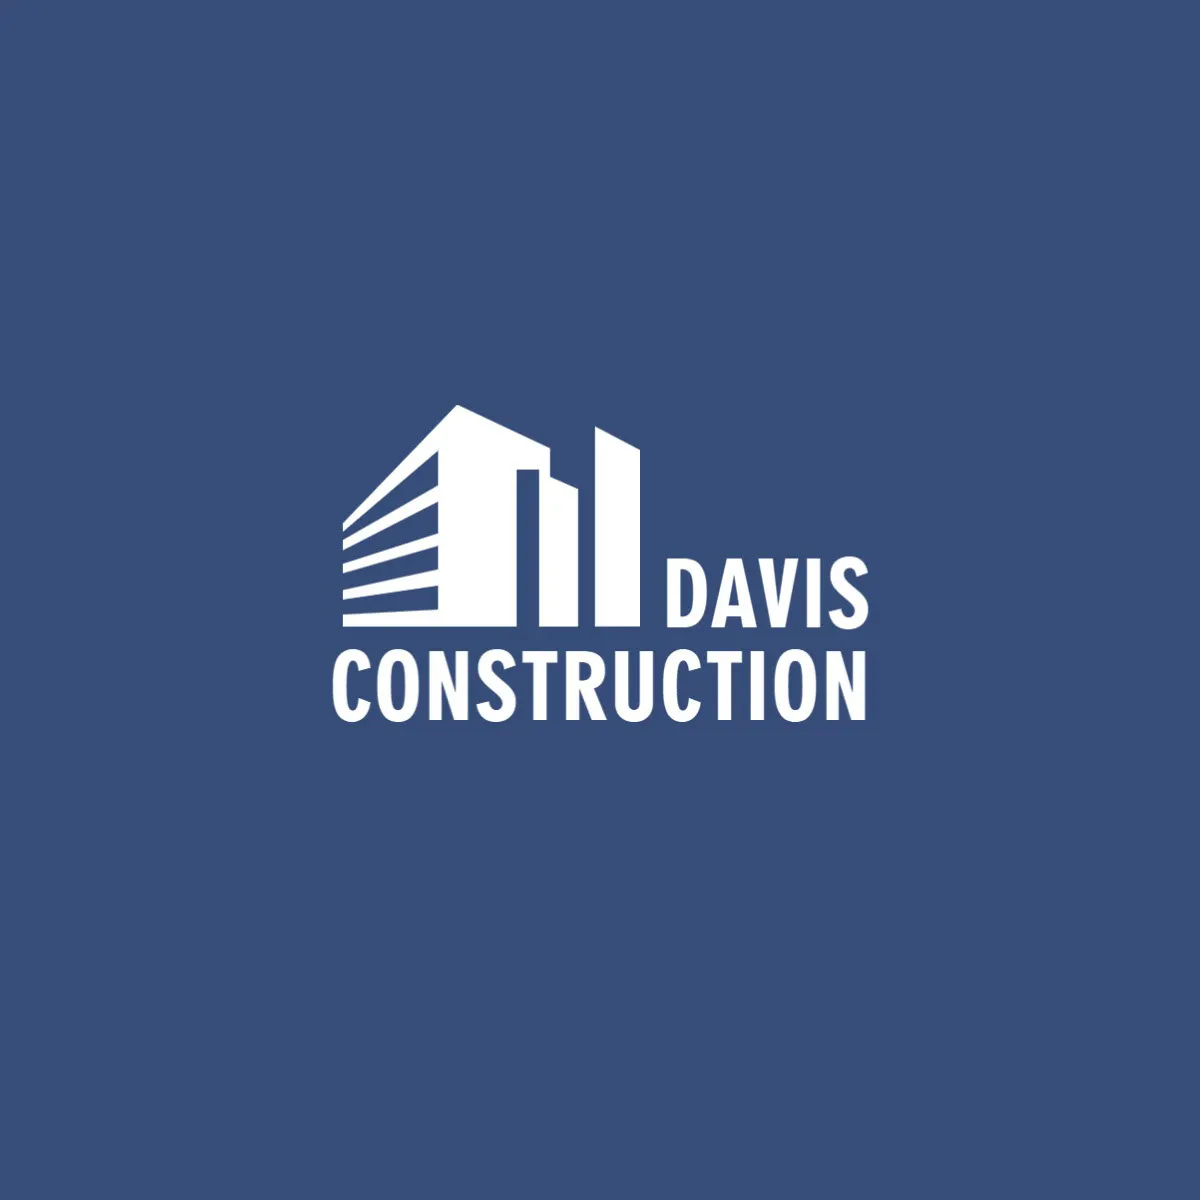 Blue And Grey Construction Business Logo